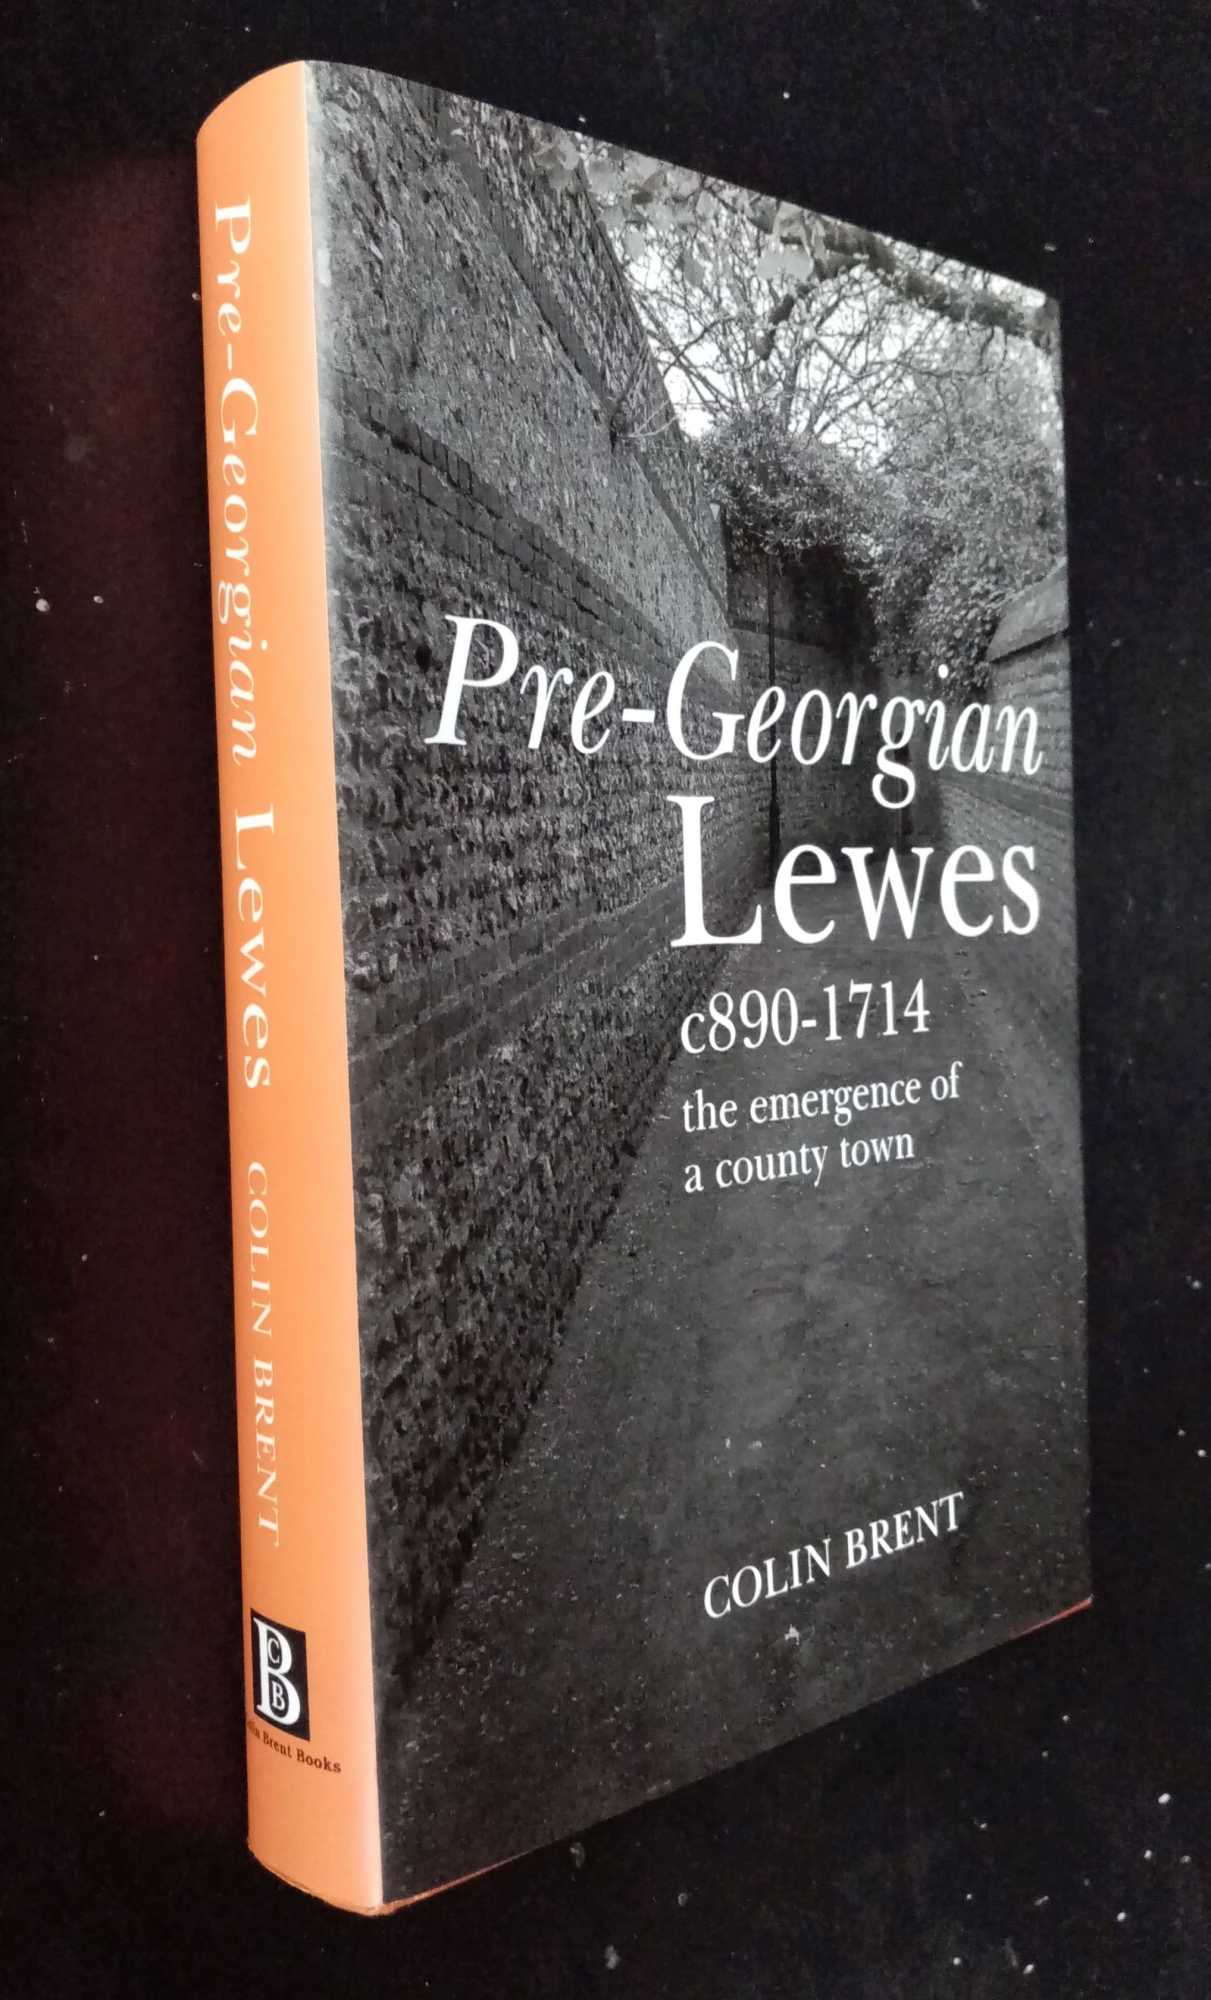 Colin Brent - Georgian Lewes, c890-1714: The emergence of a county town